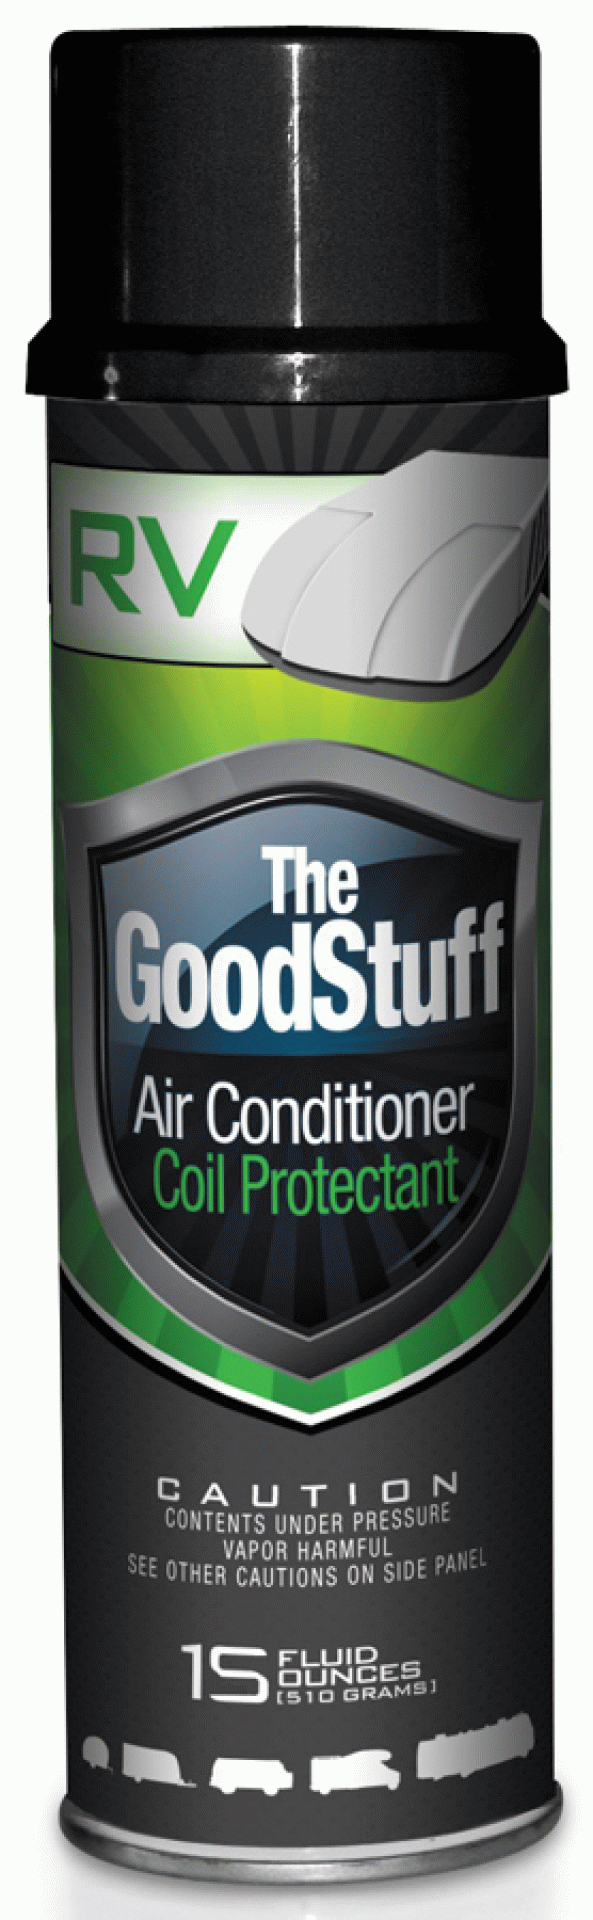 THE GOOD STUFF | GS40001 | AIR CONDITIONER COIL PROTECTANT 15 Oz.